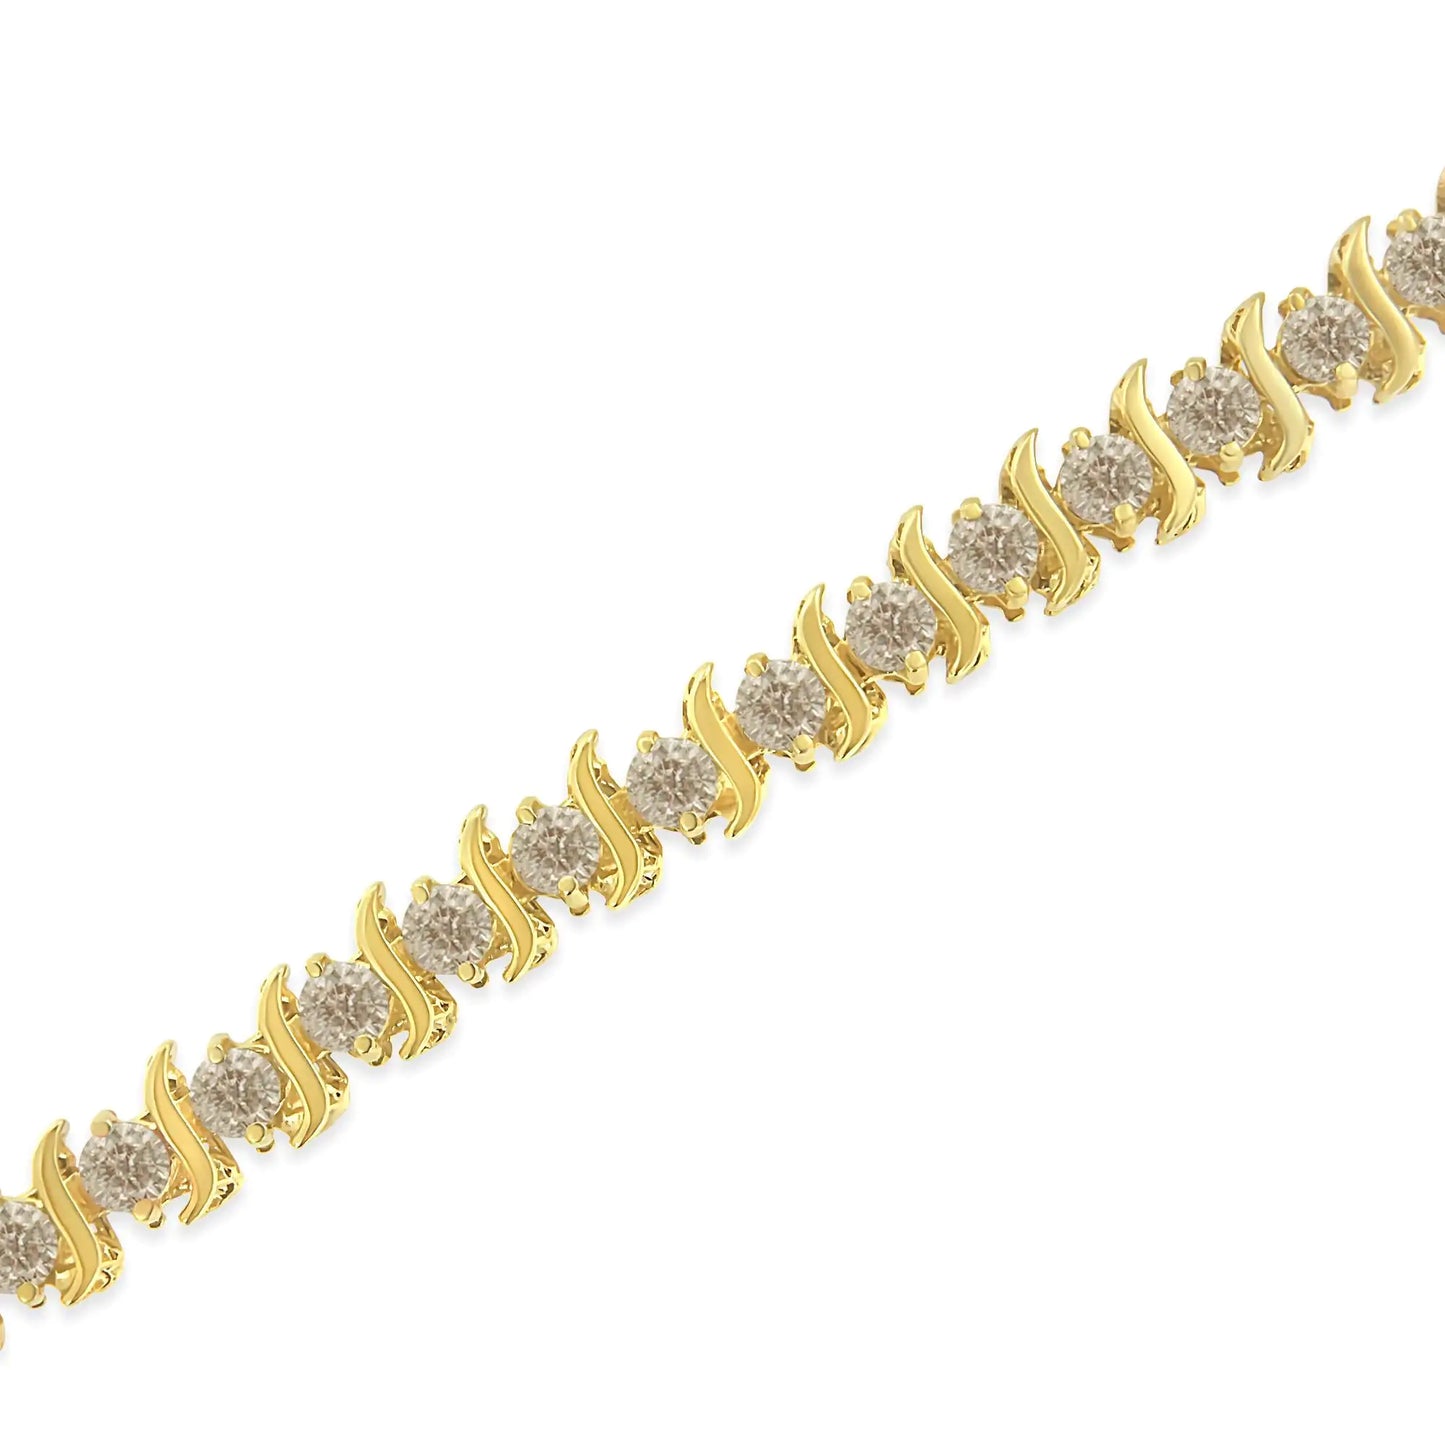 14K Yellow Gold-Plated .925 Sterling Silver 6.0 cttw Classic Round-Cut Diamond "S" Link Bracelet (J-K Color, I1-I2 Clarity) - Size 7.5"